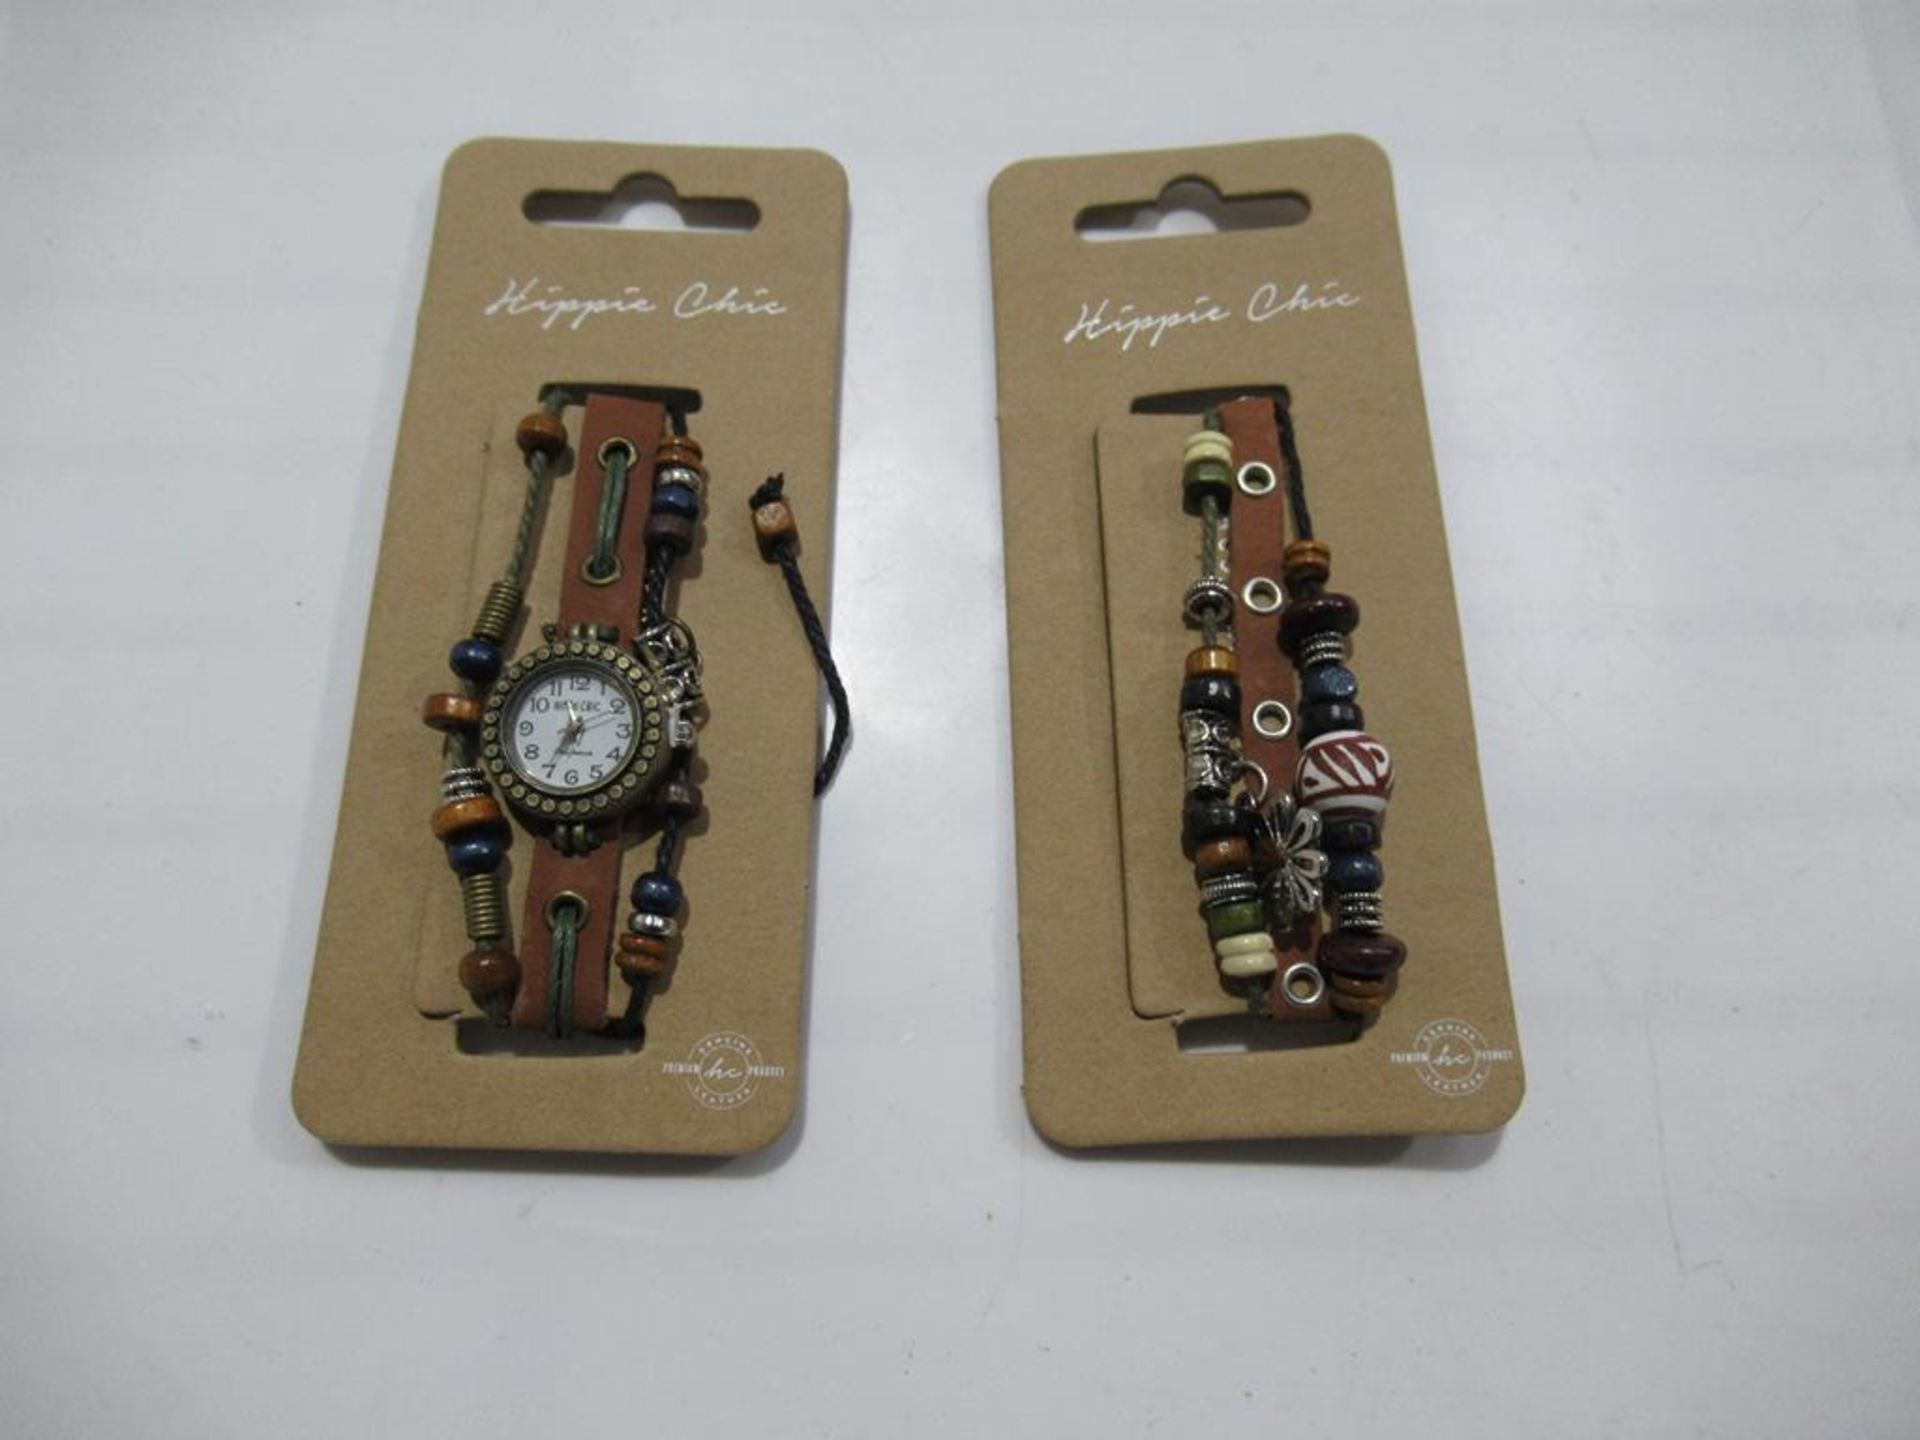 A box of Hippie Chic 'Boho' watches and bracelets - unopened (150 each); Total approx RP £1500